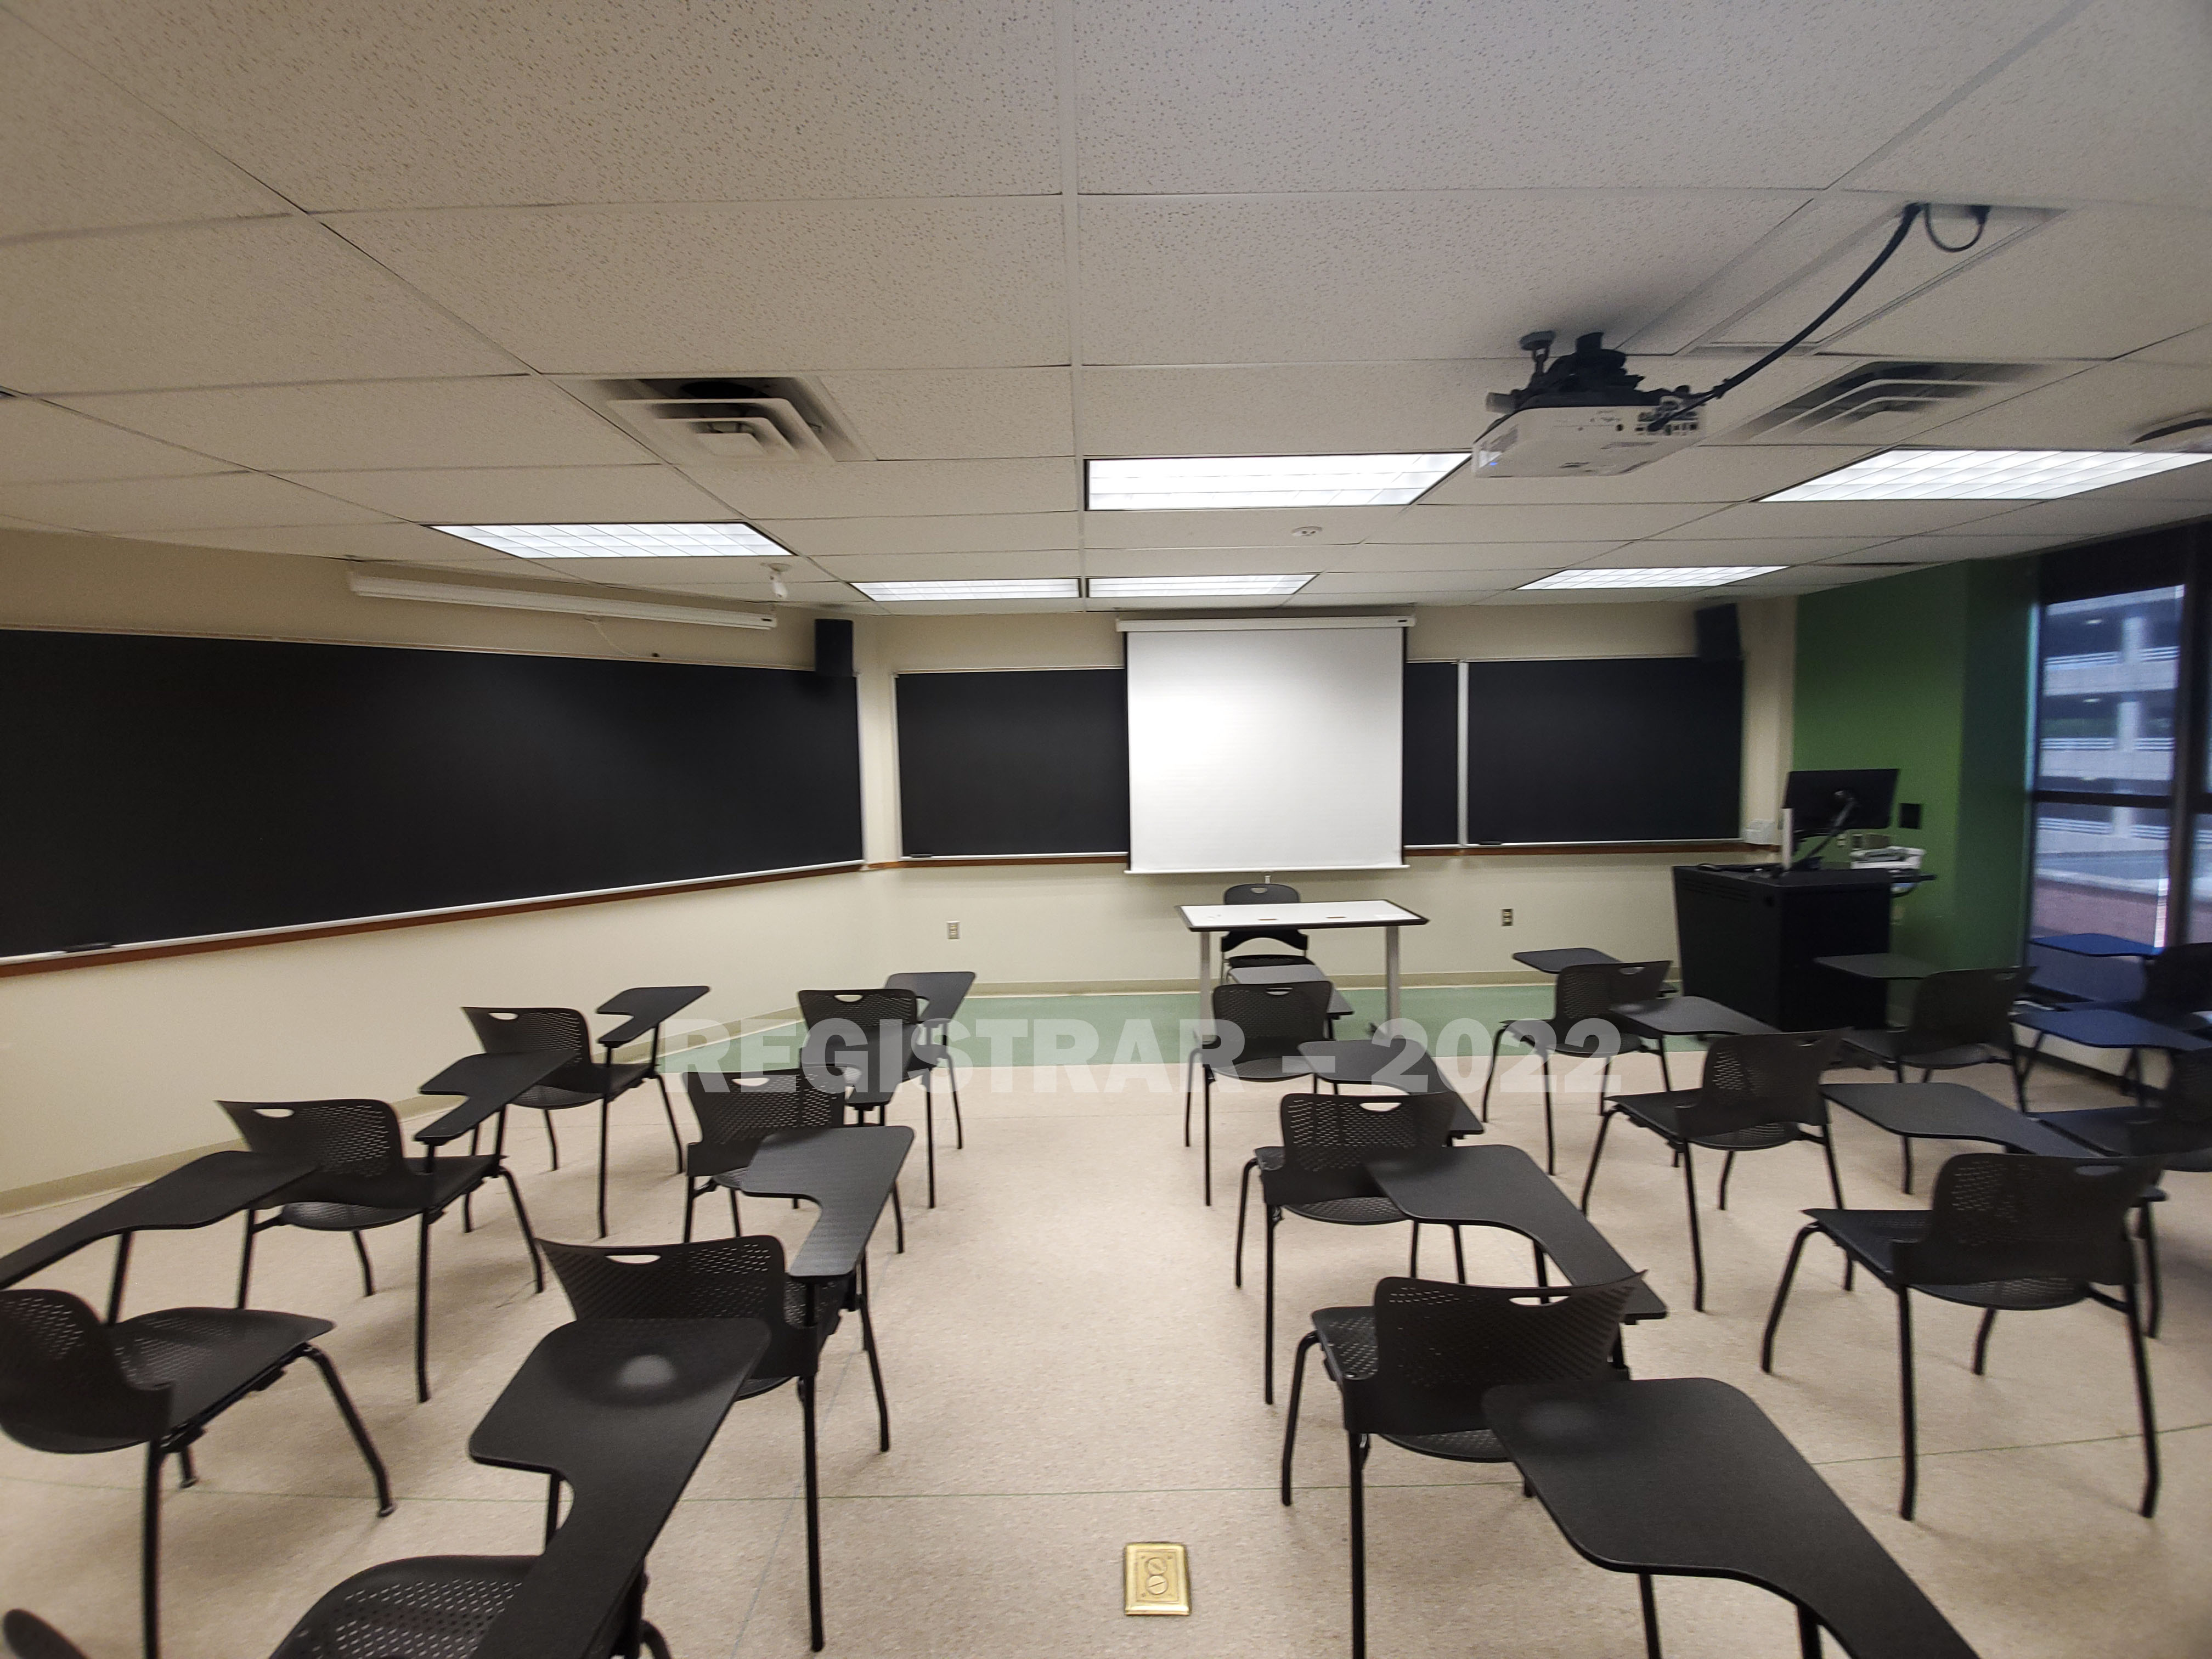 Enarson Classroom Building room 330 ultra wide angle view from the back of the room with projector screen down